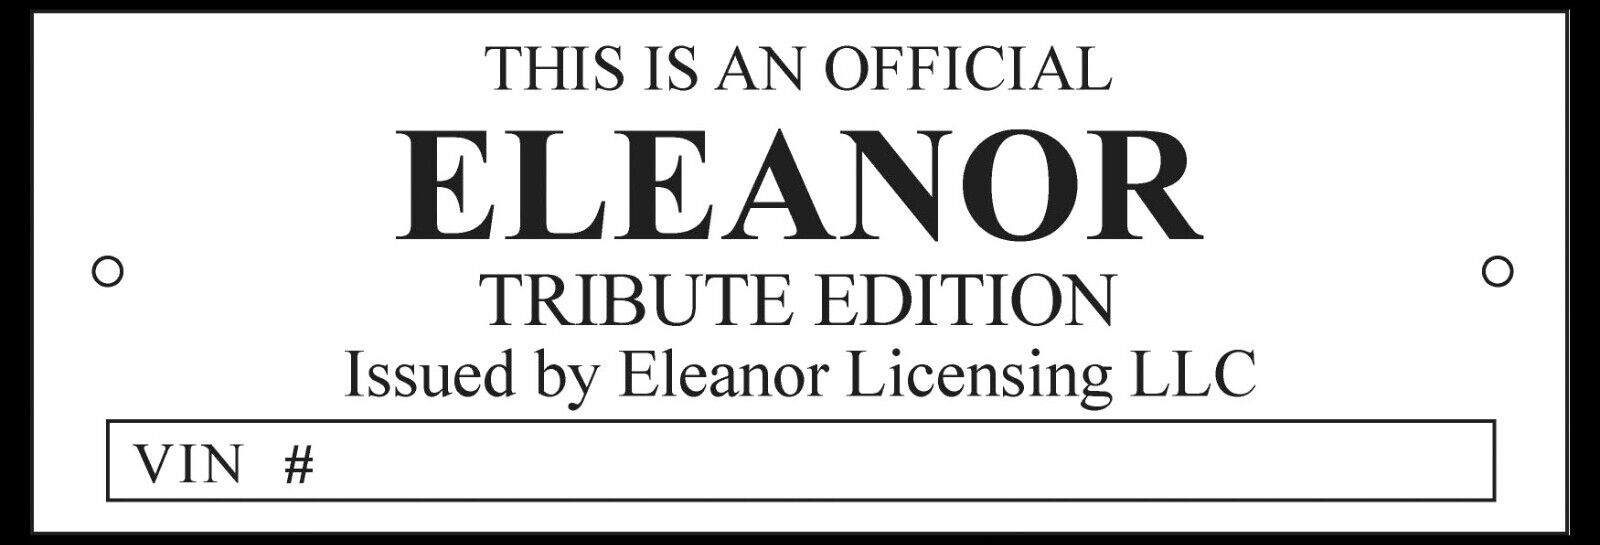 Eleanor Tribute Edition Ford Shelby Mustang Plate Tag Emblem Reproduction